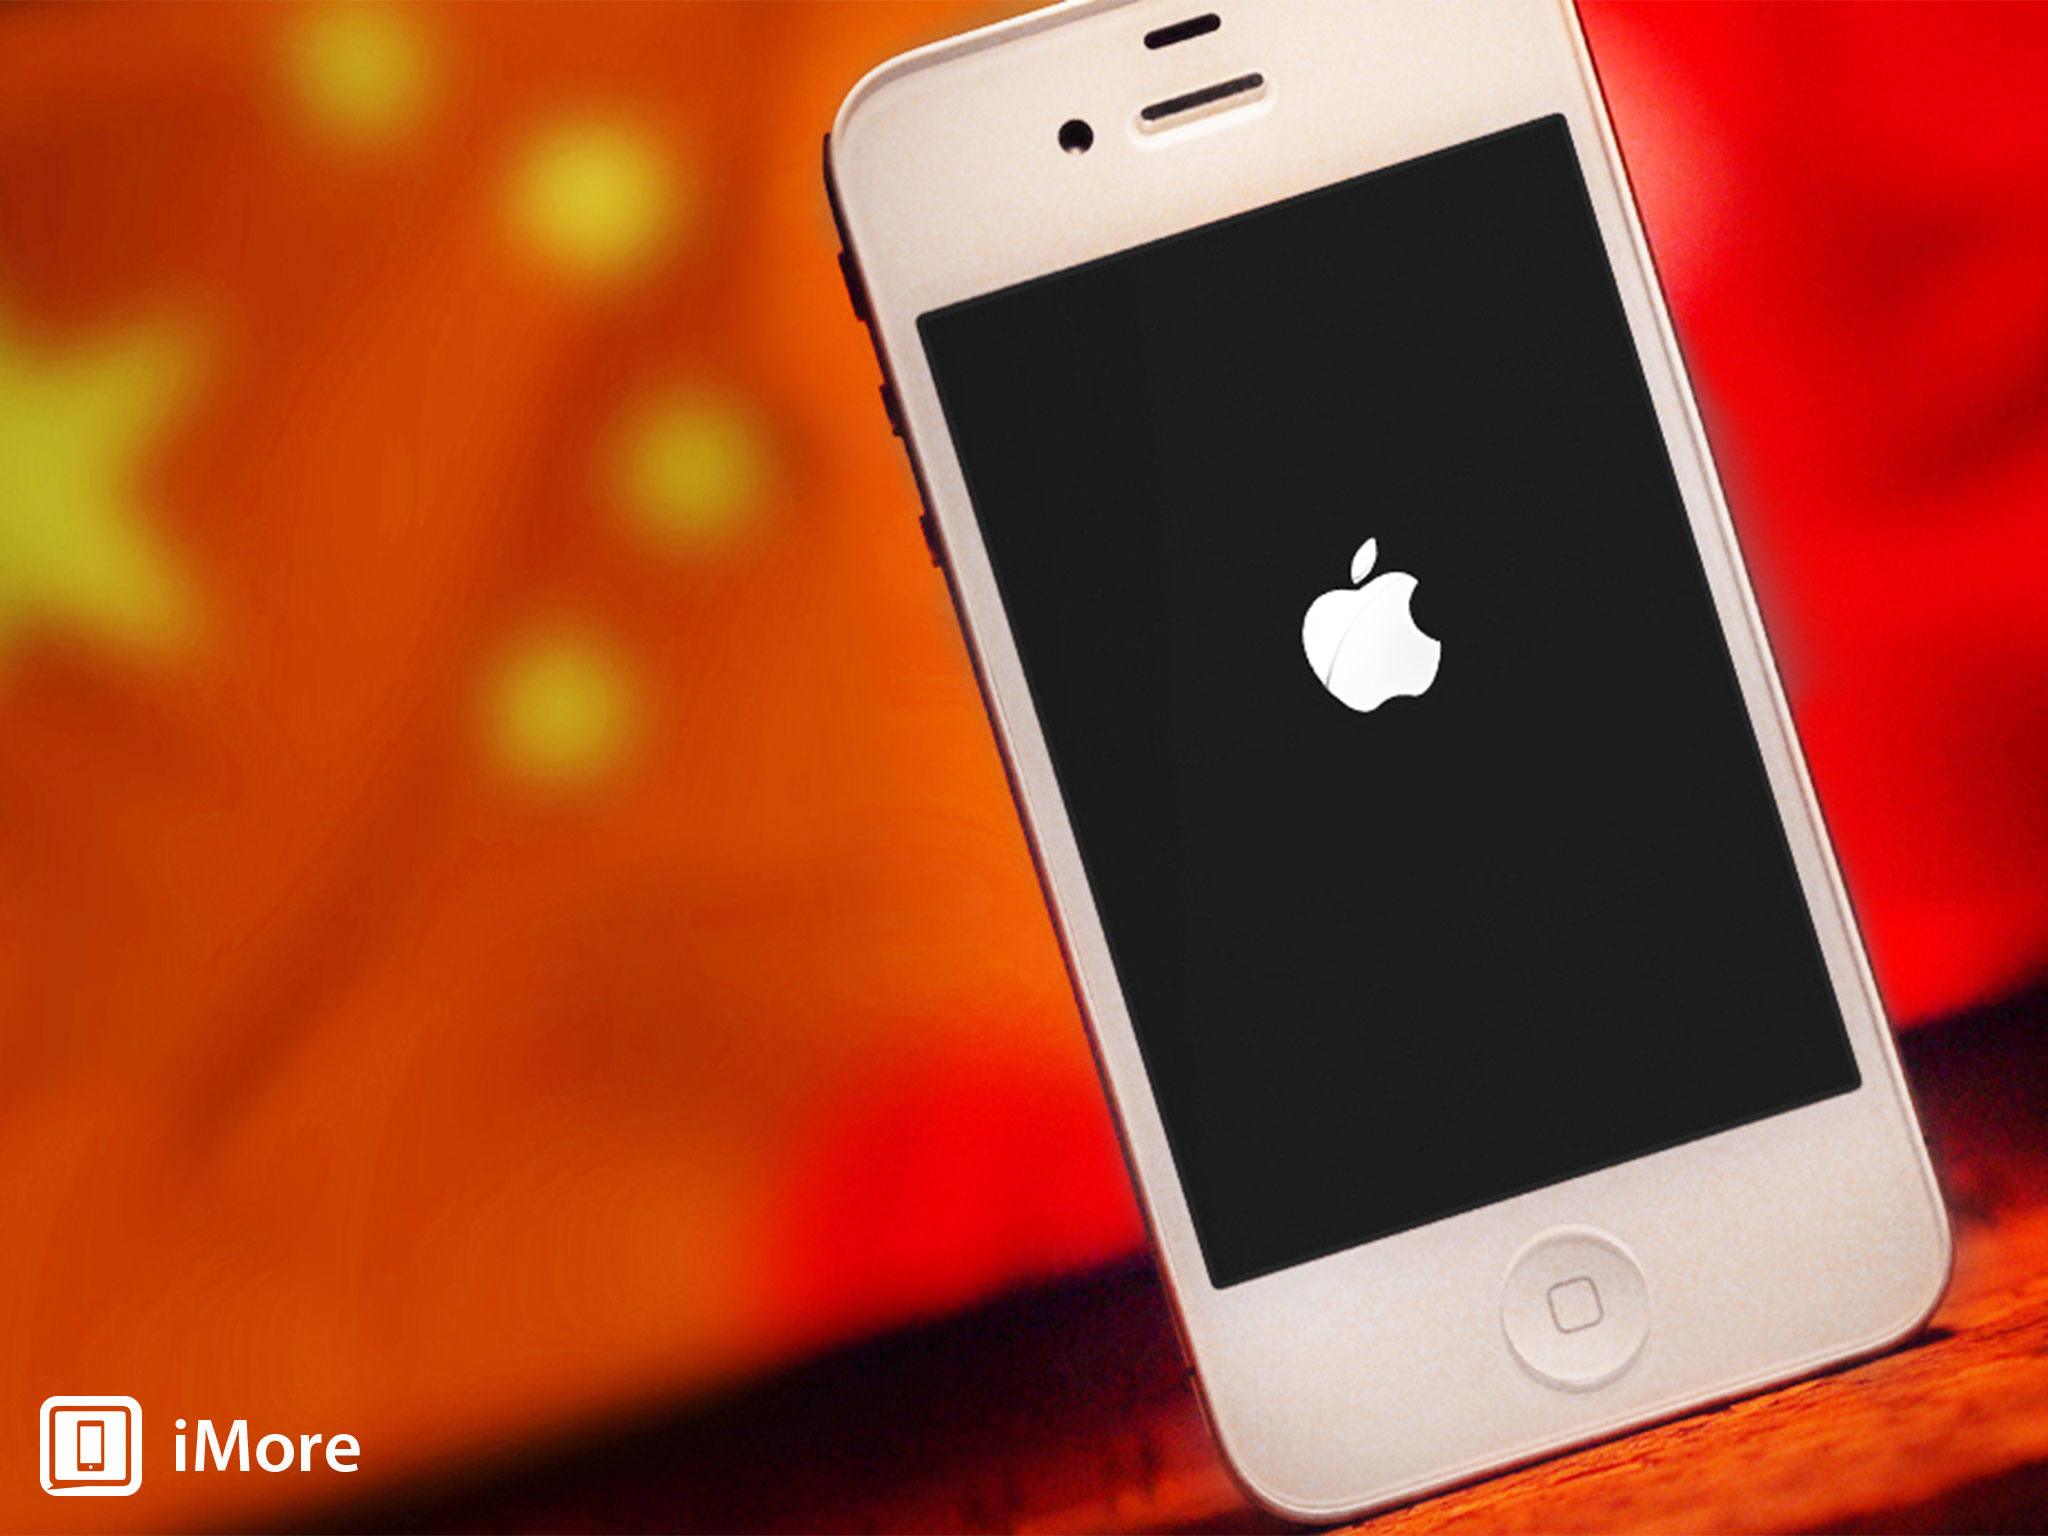 Apple seeing good growth in China, iPhone sales 25% up year-on-year 